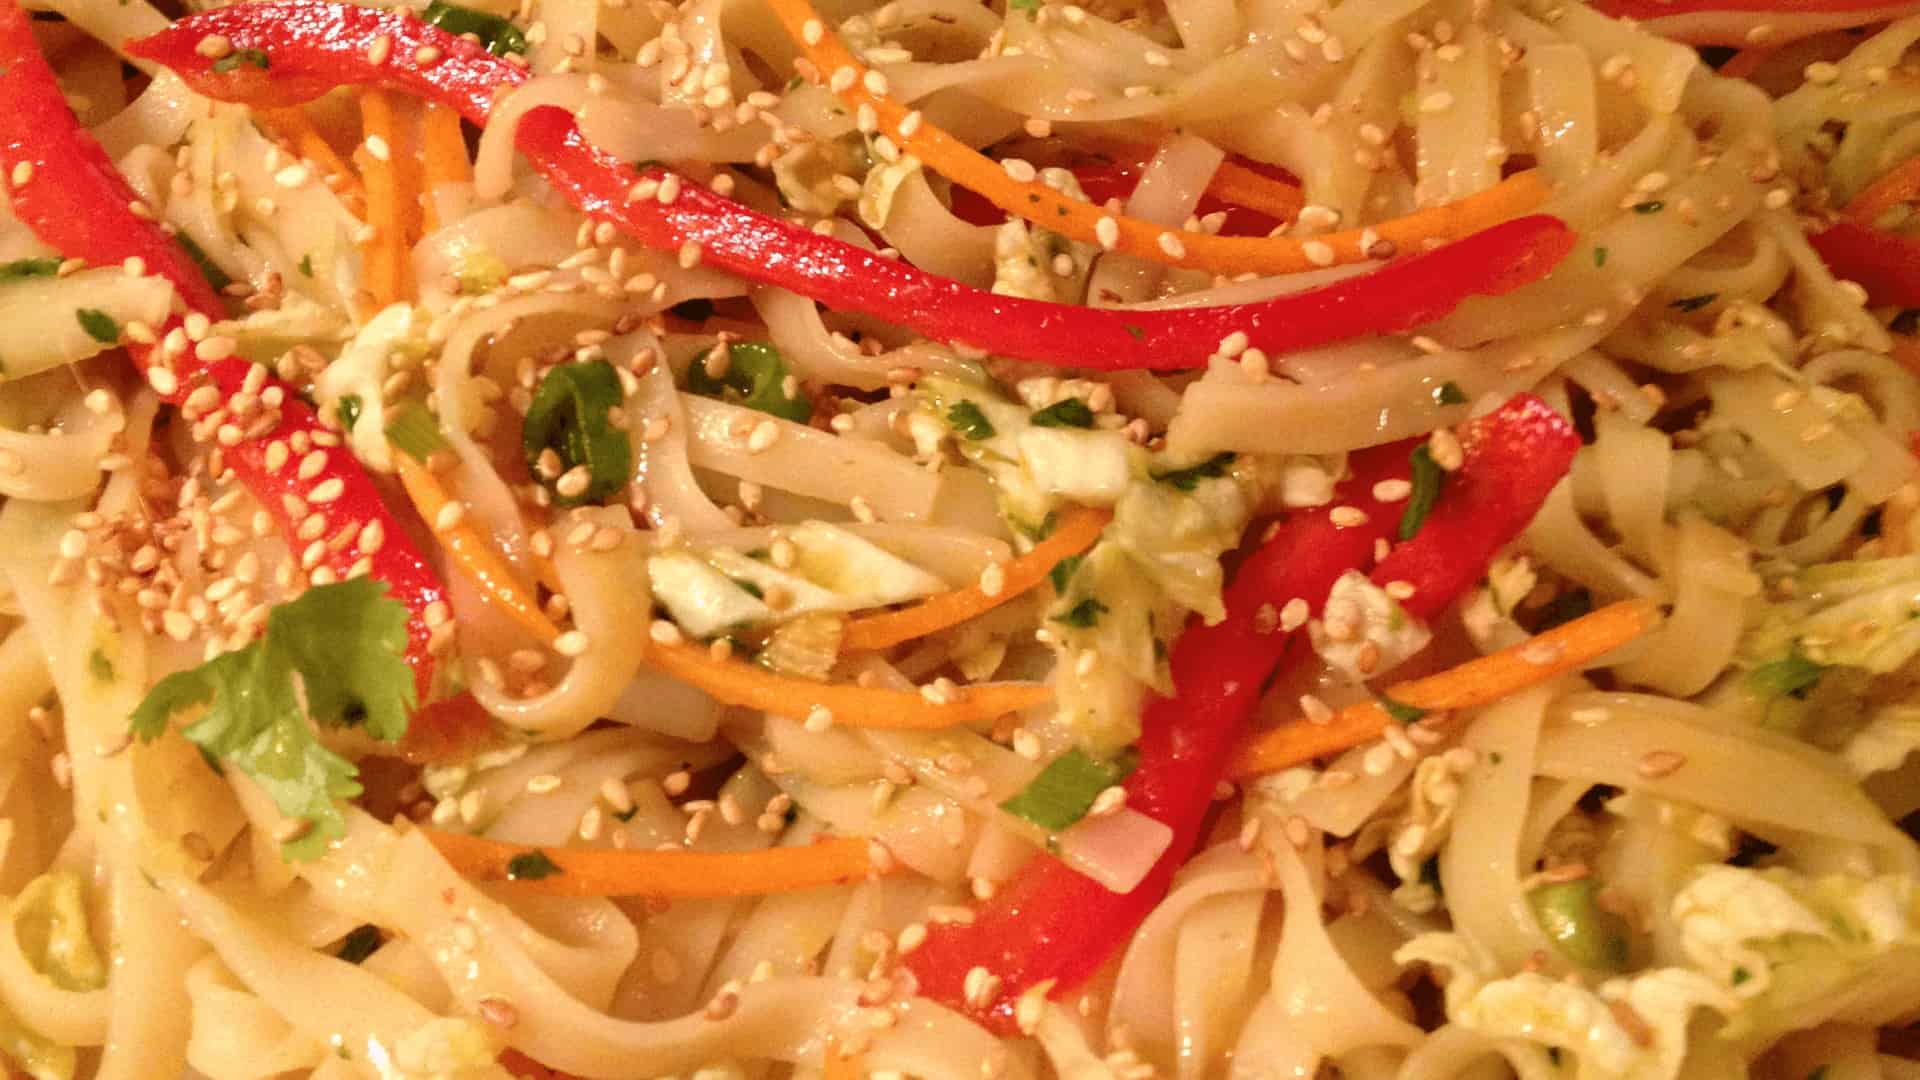 Spicy Asian Noodle Salad - © ProtectiveDiet.com